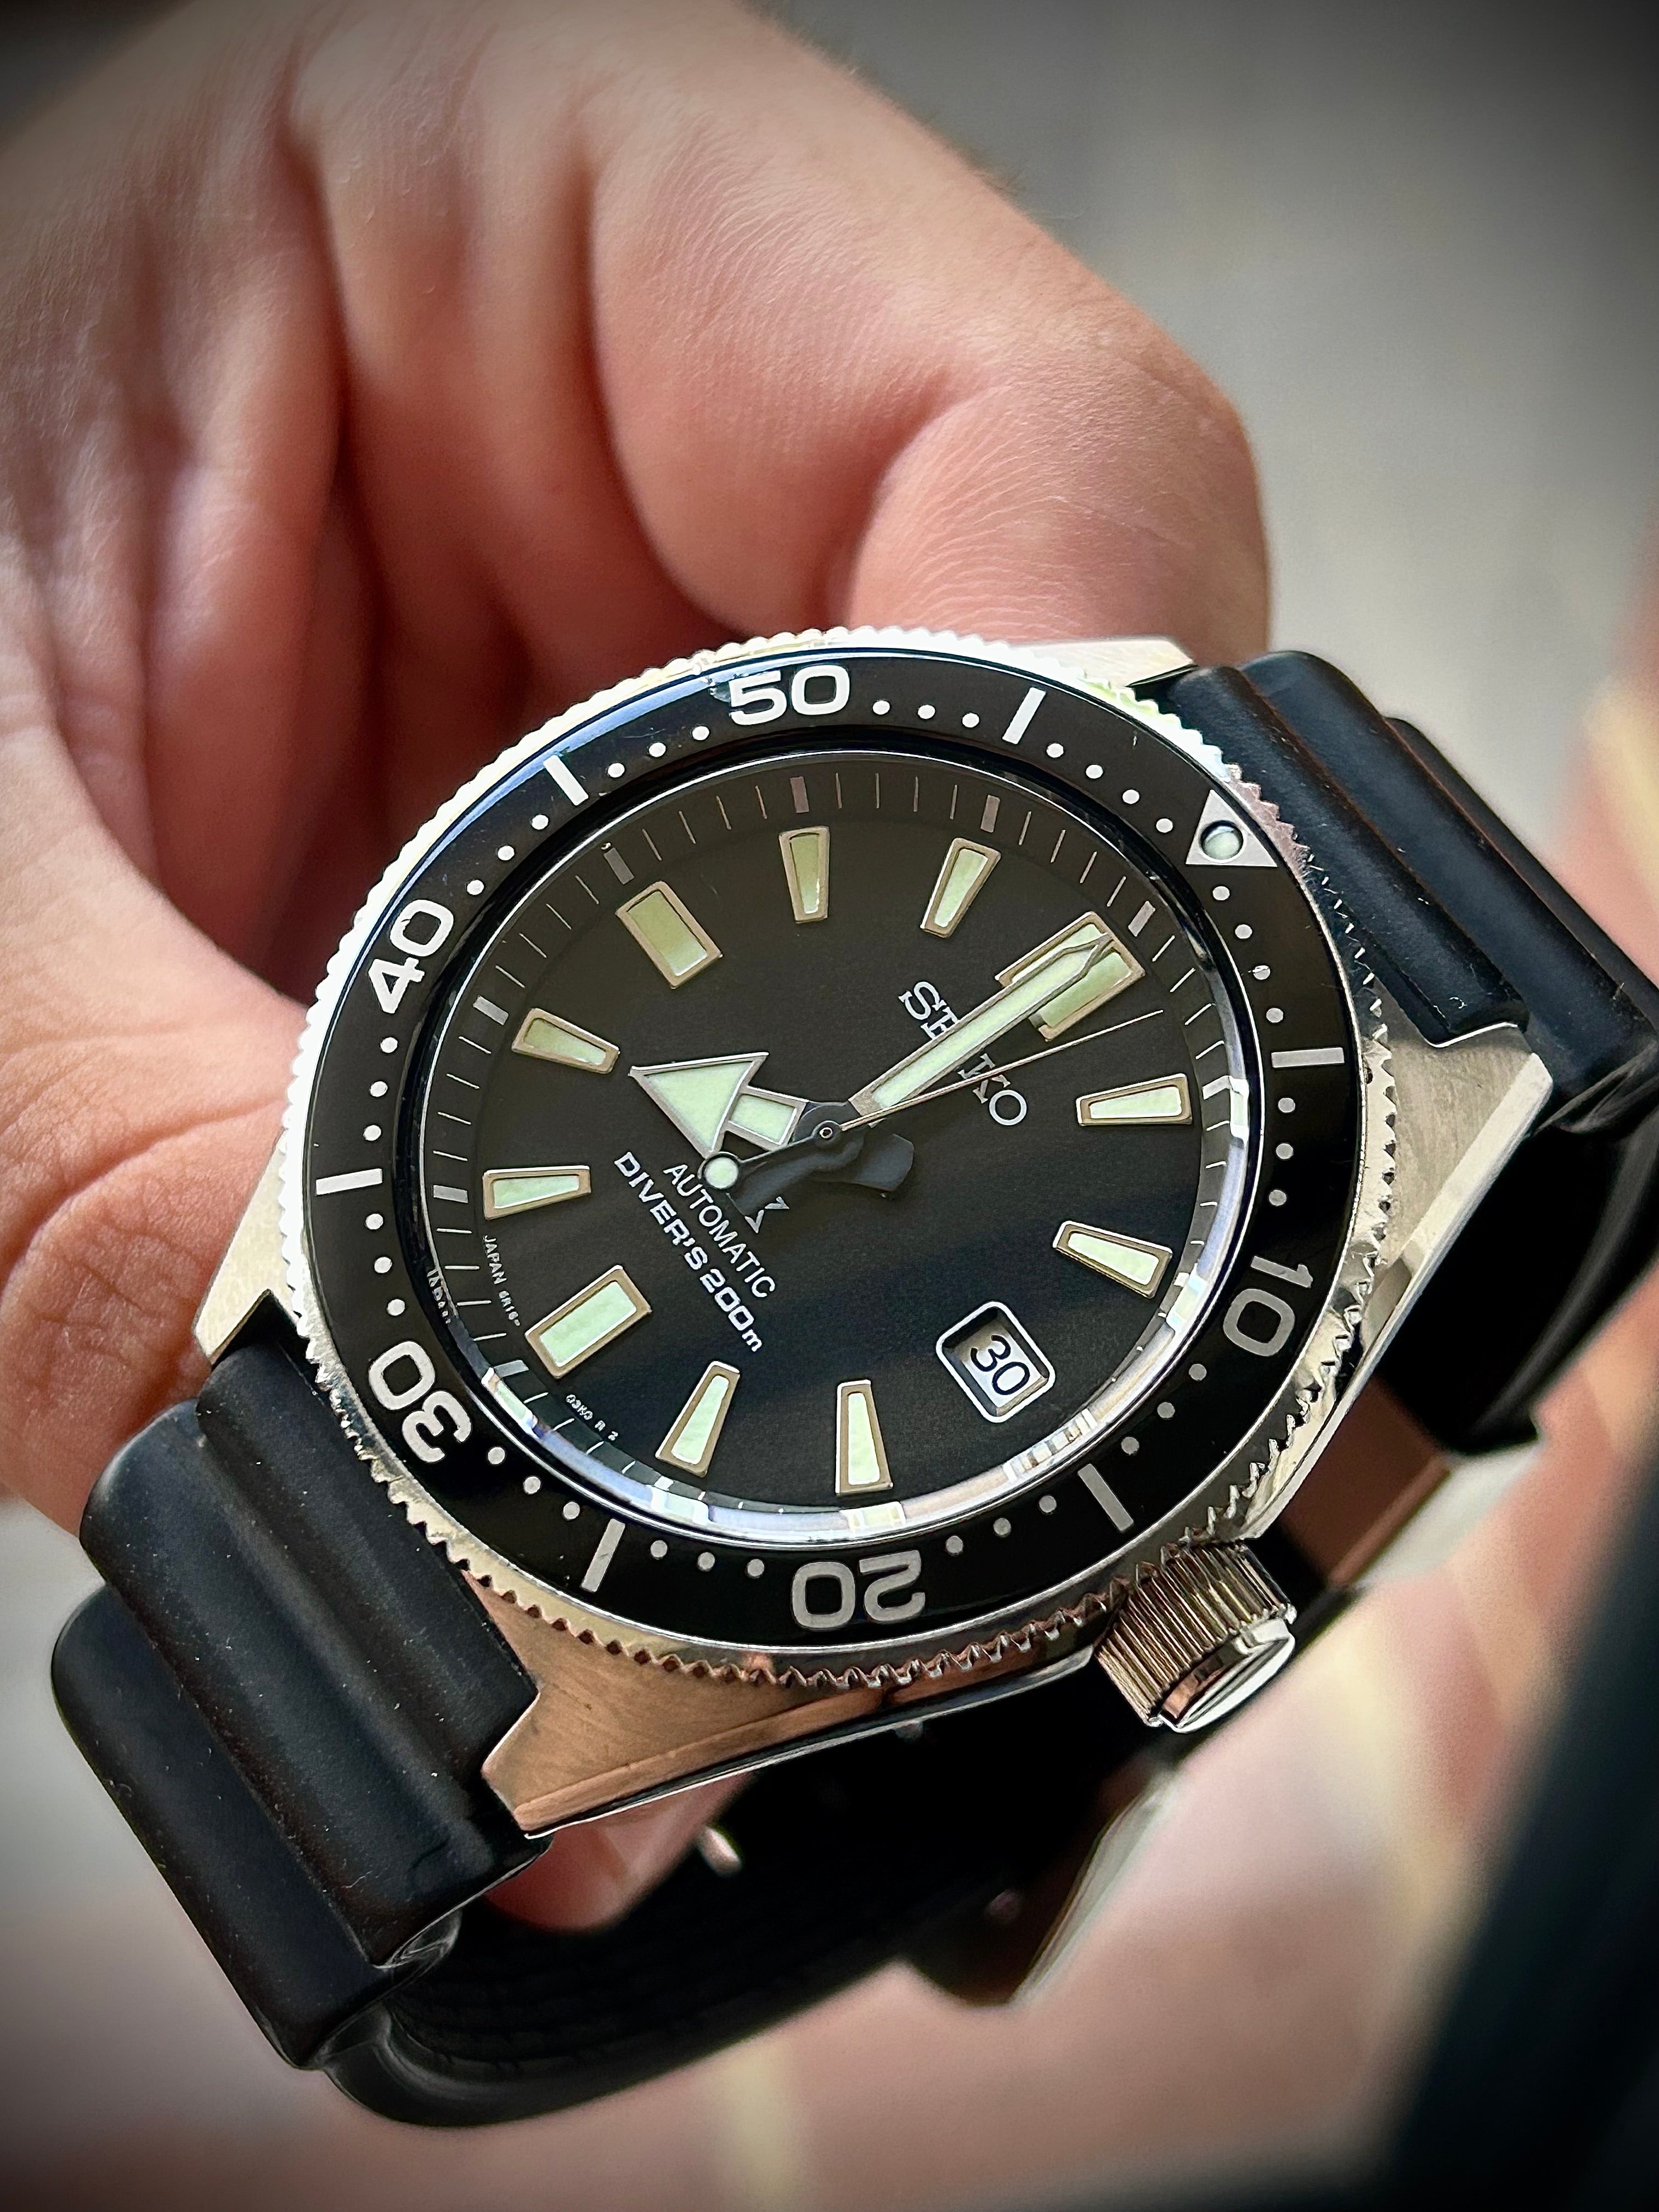 SEIKO PROSPEX AUTOMATIC DIVE WATCH, SBDC051, WATCH ONLY